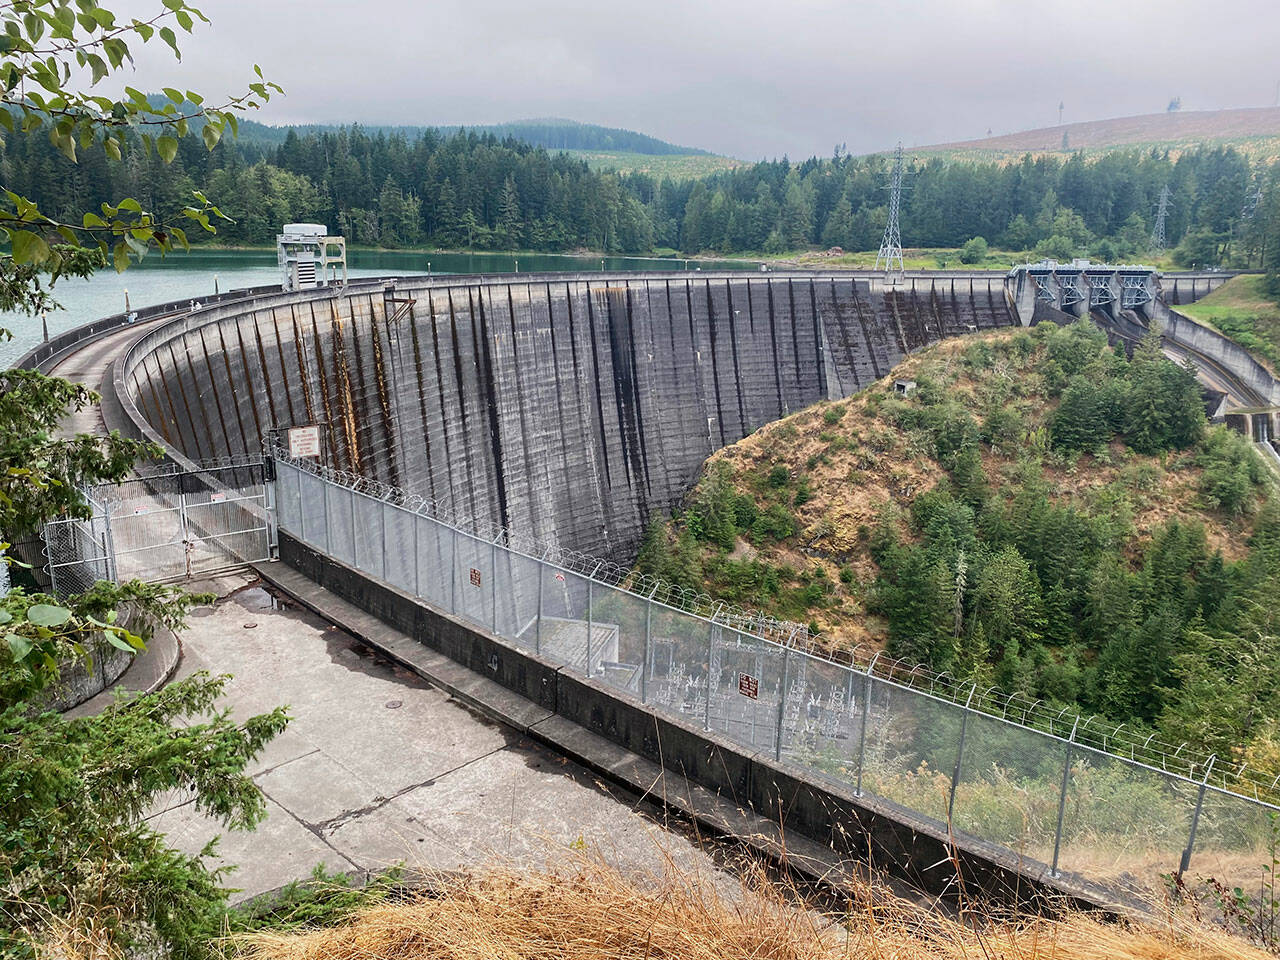 Pictured here is the 300-foot tall Alder Dam that creates the reservoir. Photo by Kevin Hanson